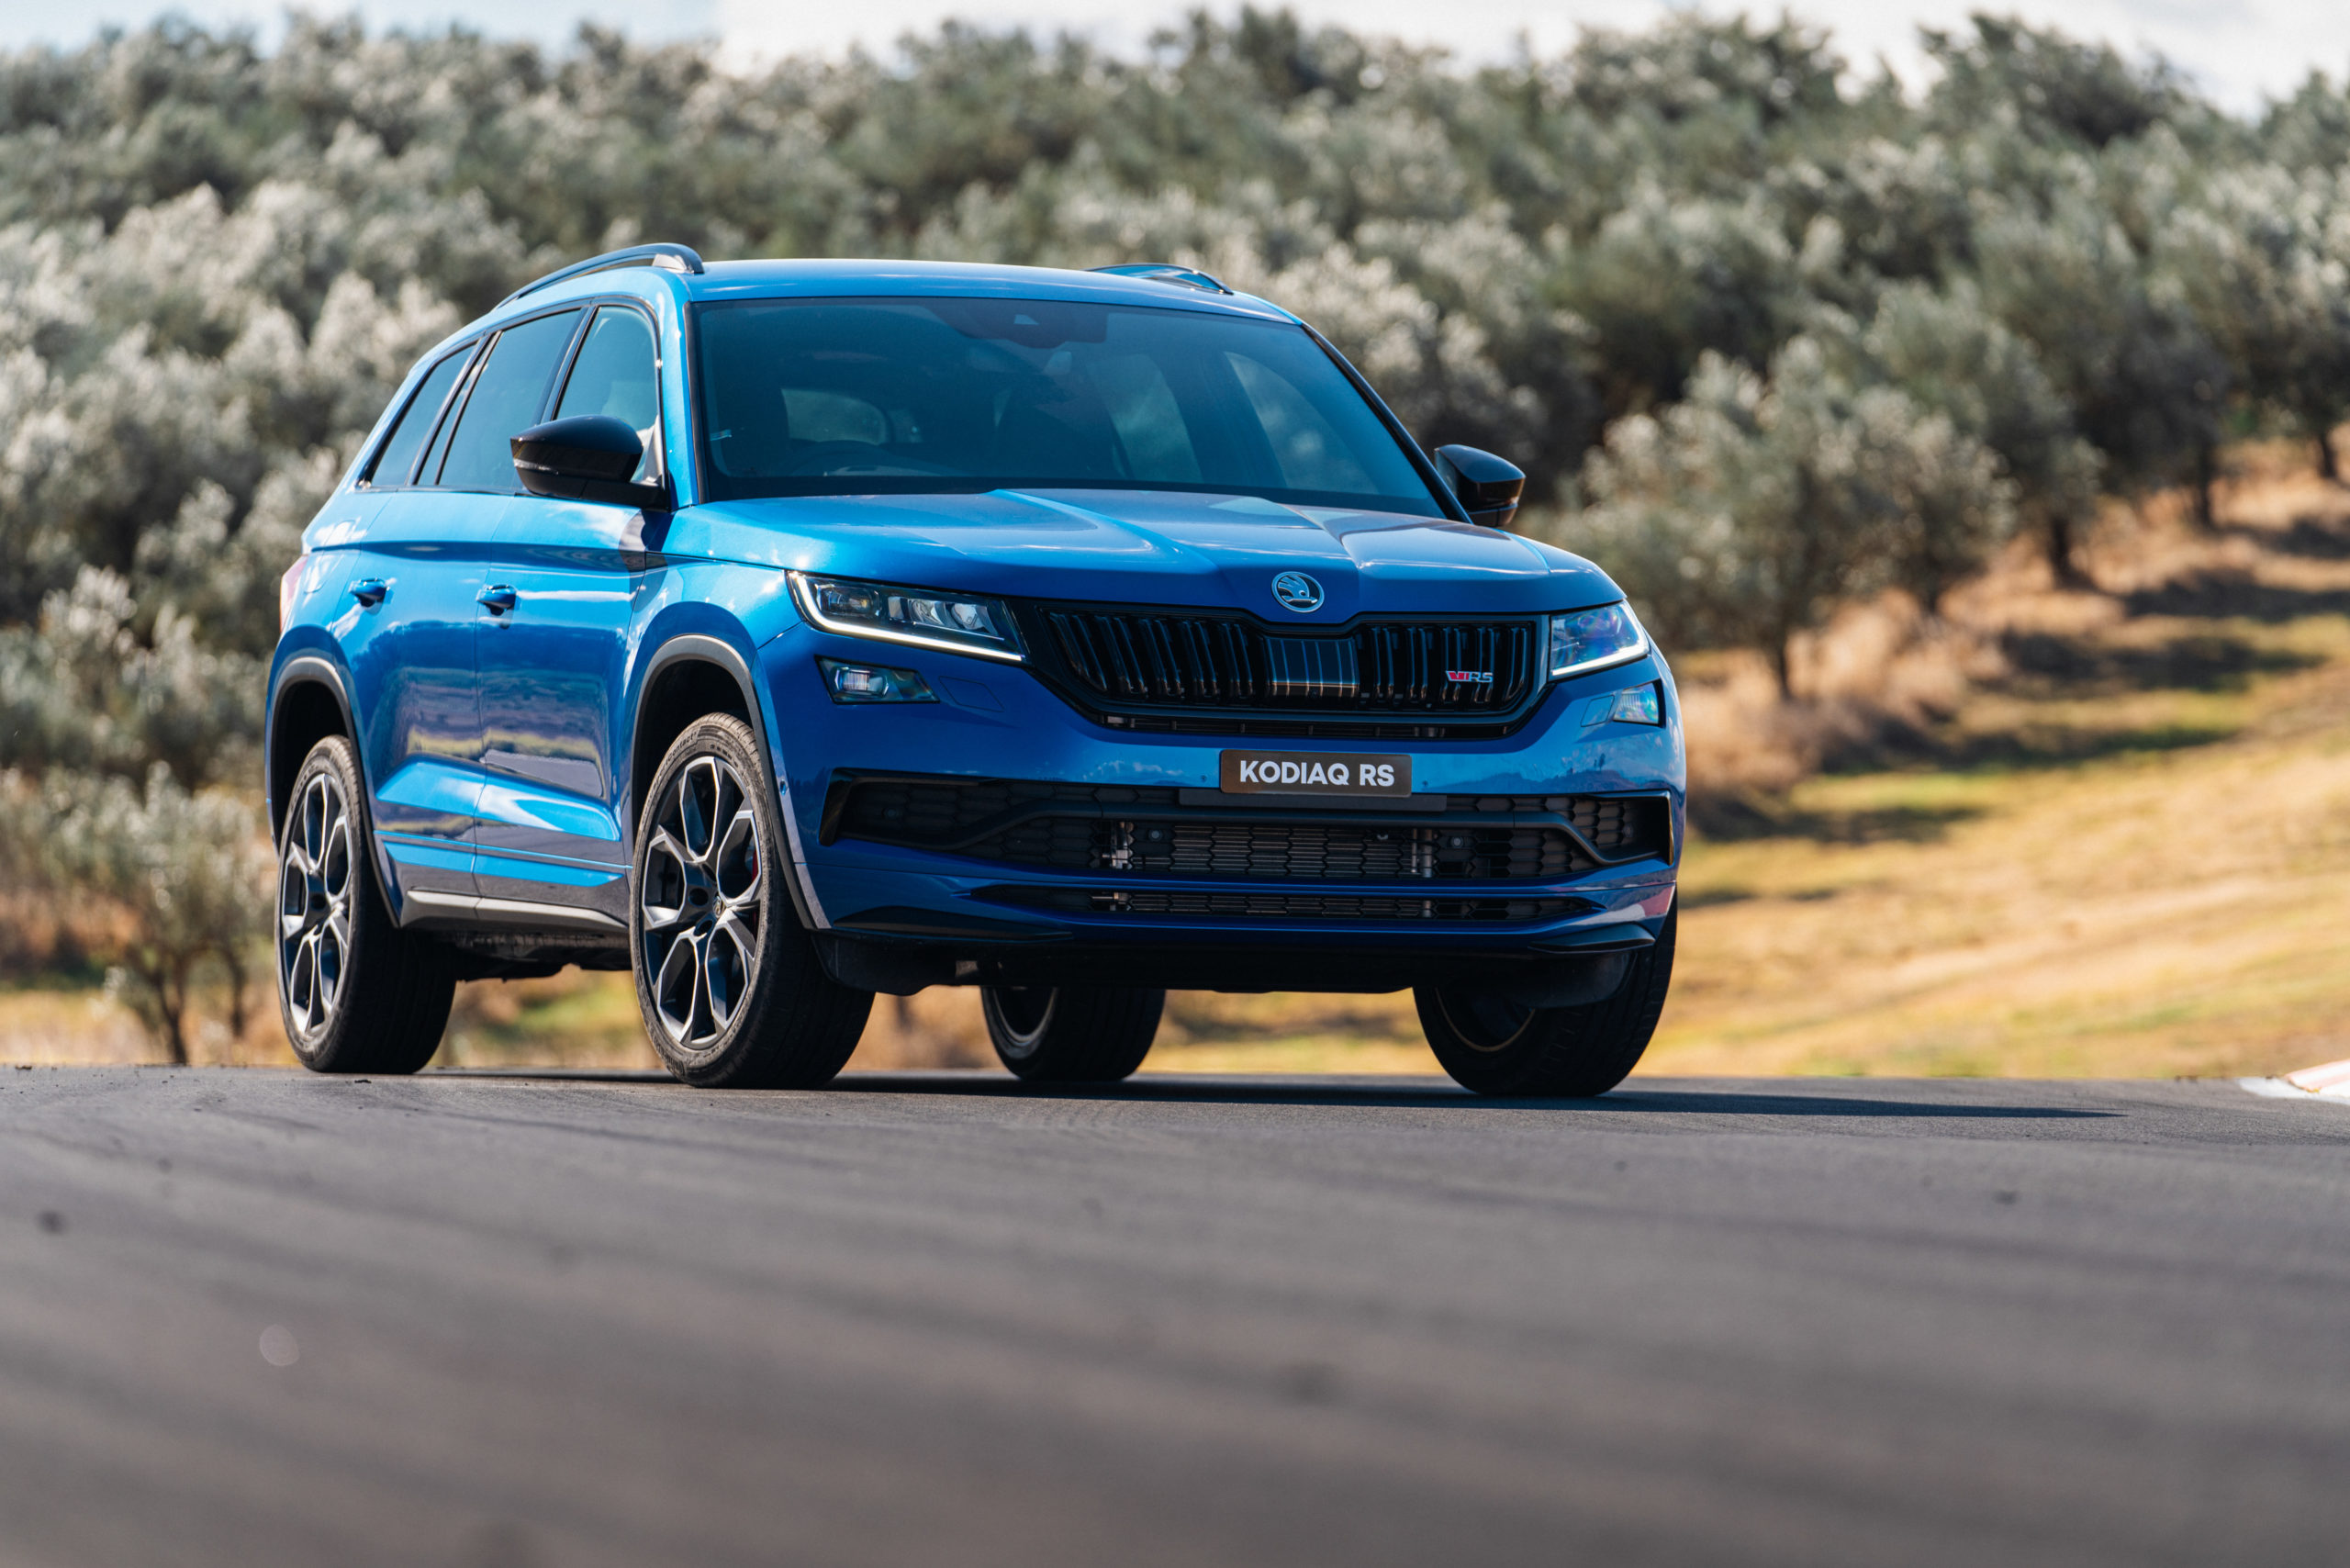 2020 Skoda Kodiaq RS Is Aimed At A Rather Narrow Target Group